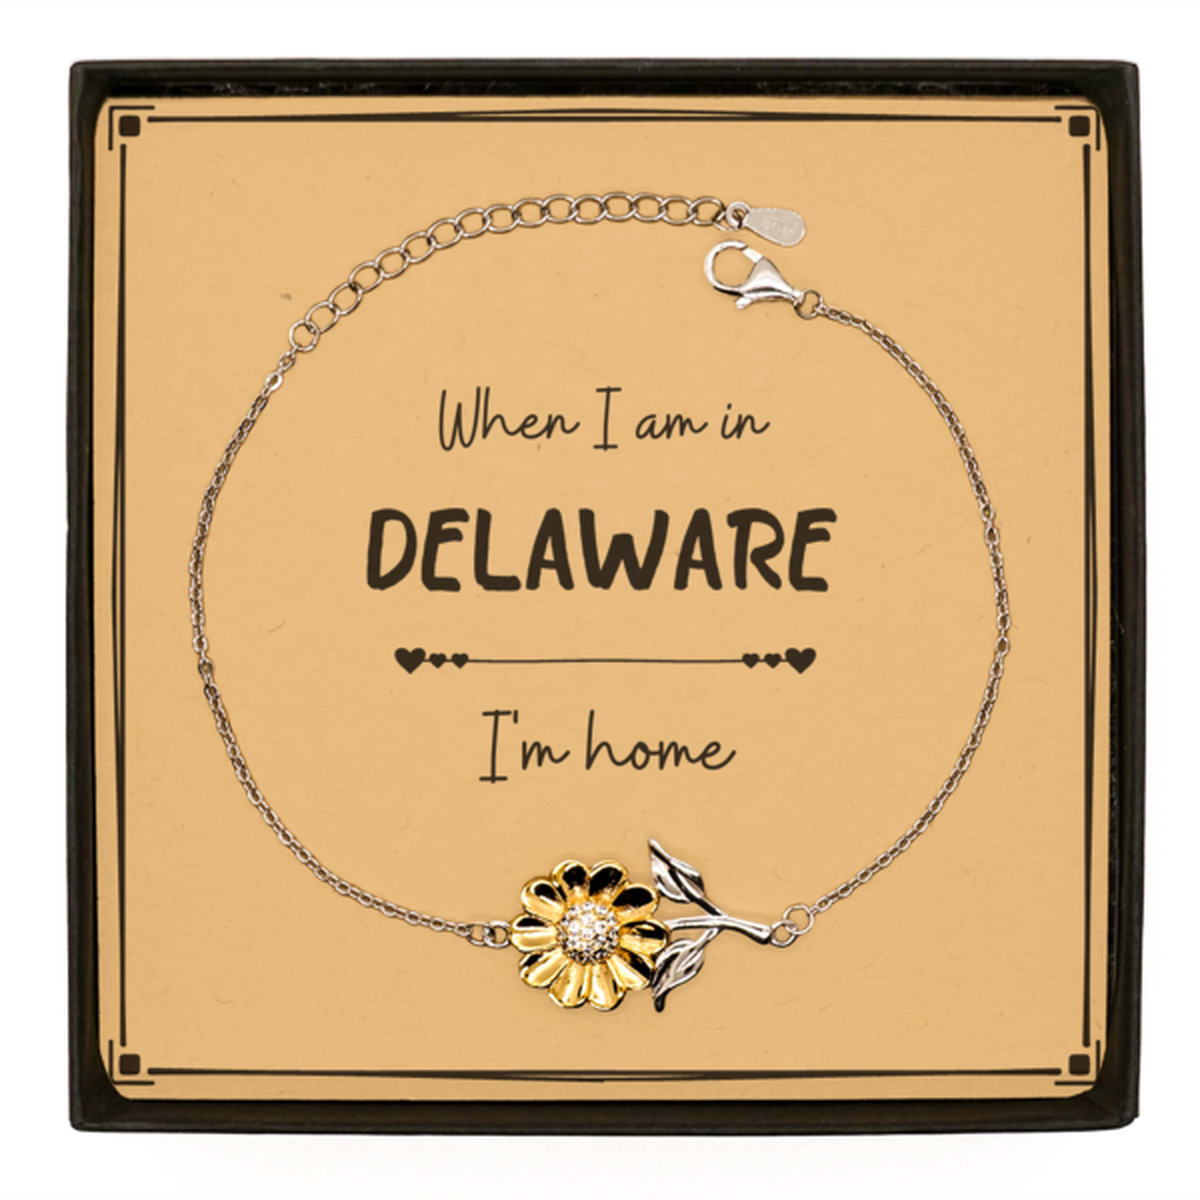 When I am in Delaware I'm home Sunflower Bracelet, Message Card Gifts For Delaware, State Delaware Birthday Gifts for Friends Coworker